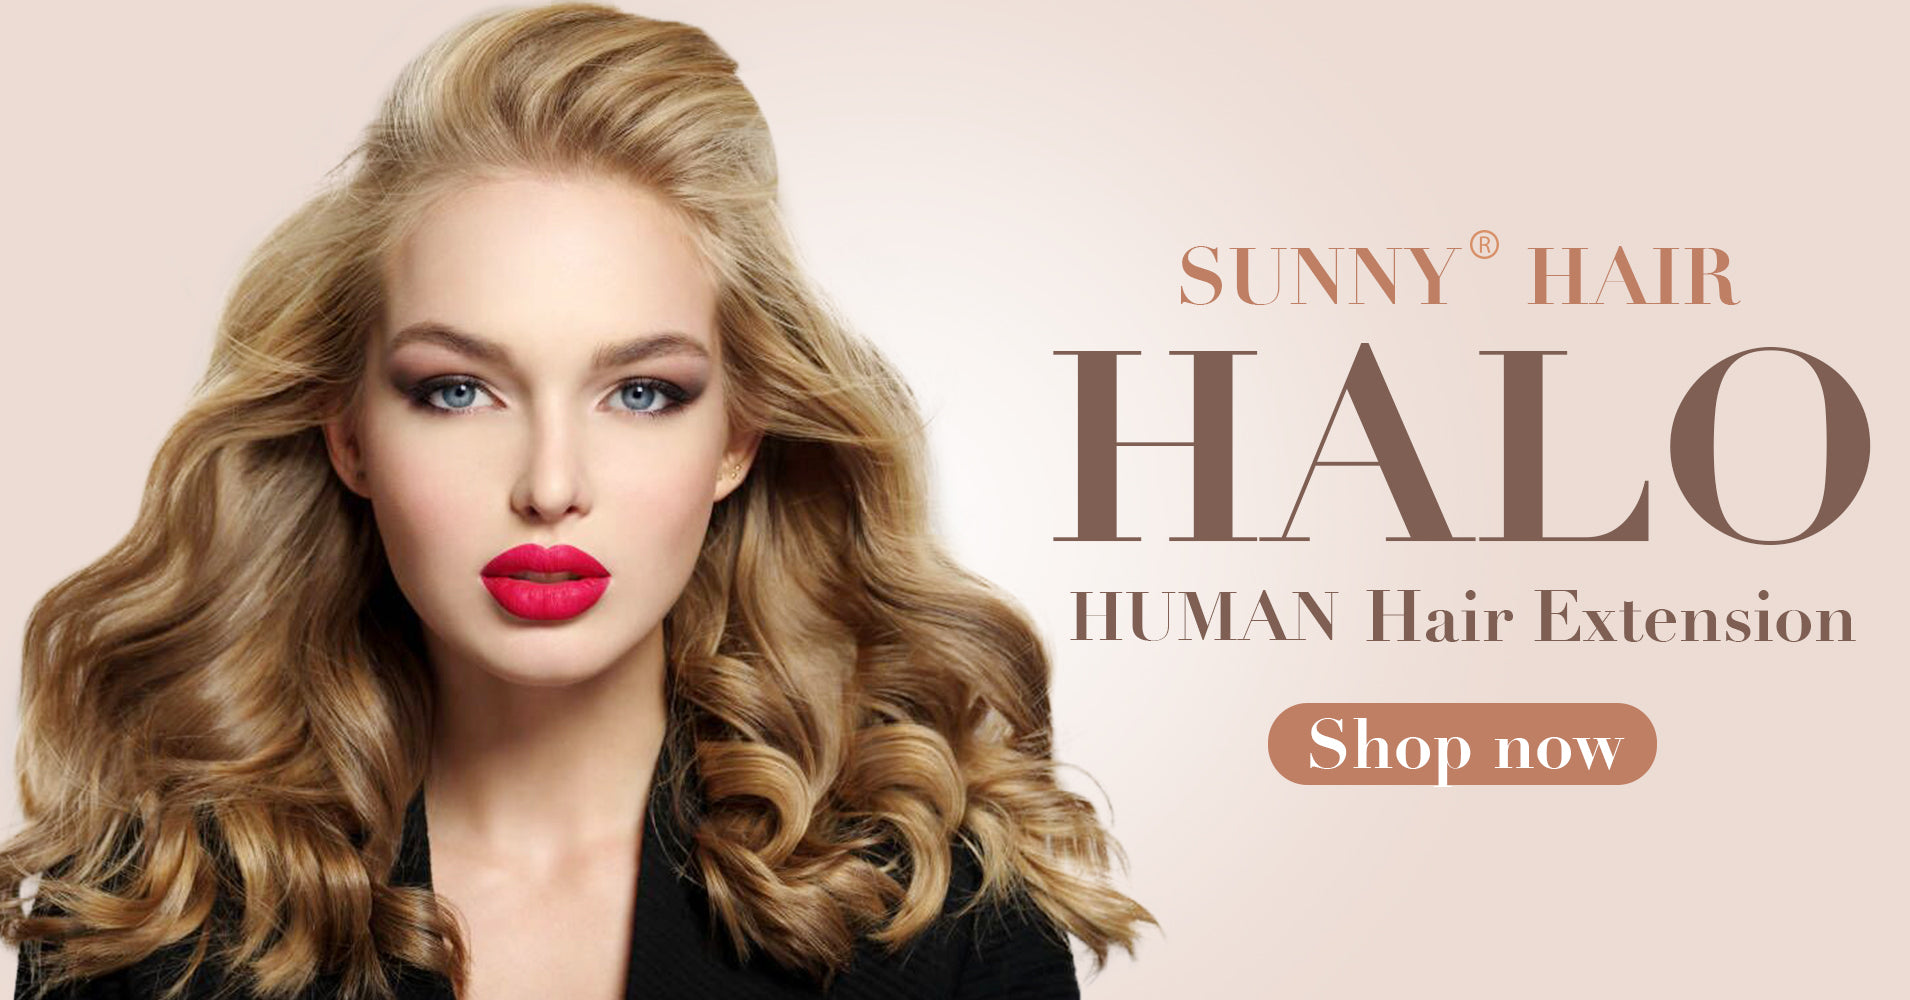 Sunny Hair,Best Halo Hair Extensions,Halo Hair extenison no glue siky straight natural hair